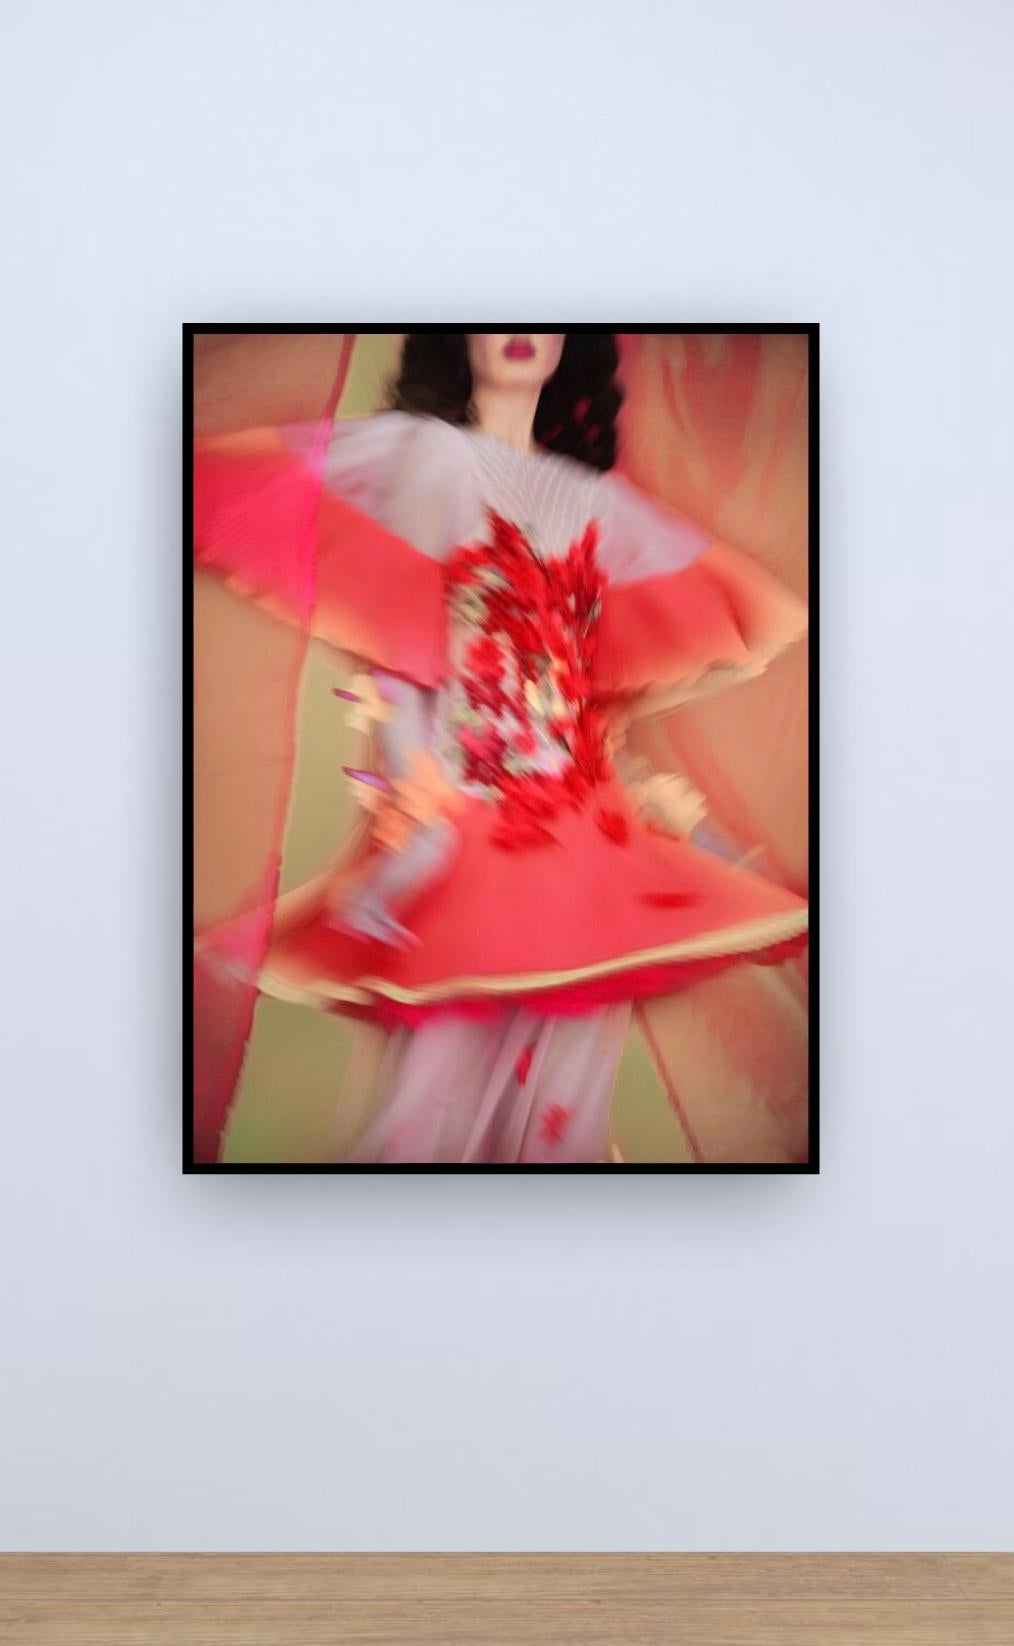 Not titled yet, 2022 – Erik Madigan Heck, Fashion Photography, Woman, Blurry For Sale 1